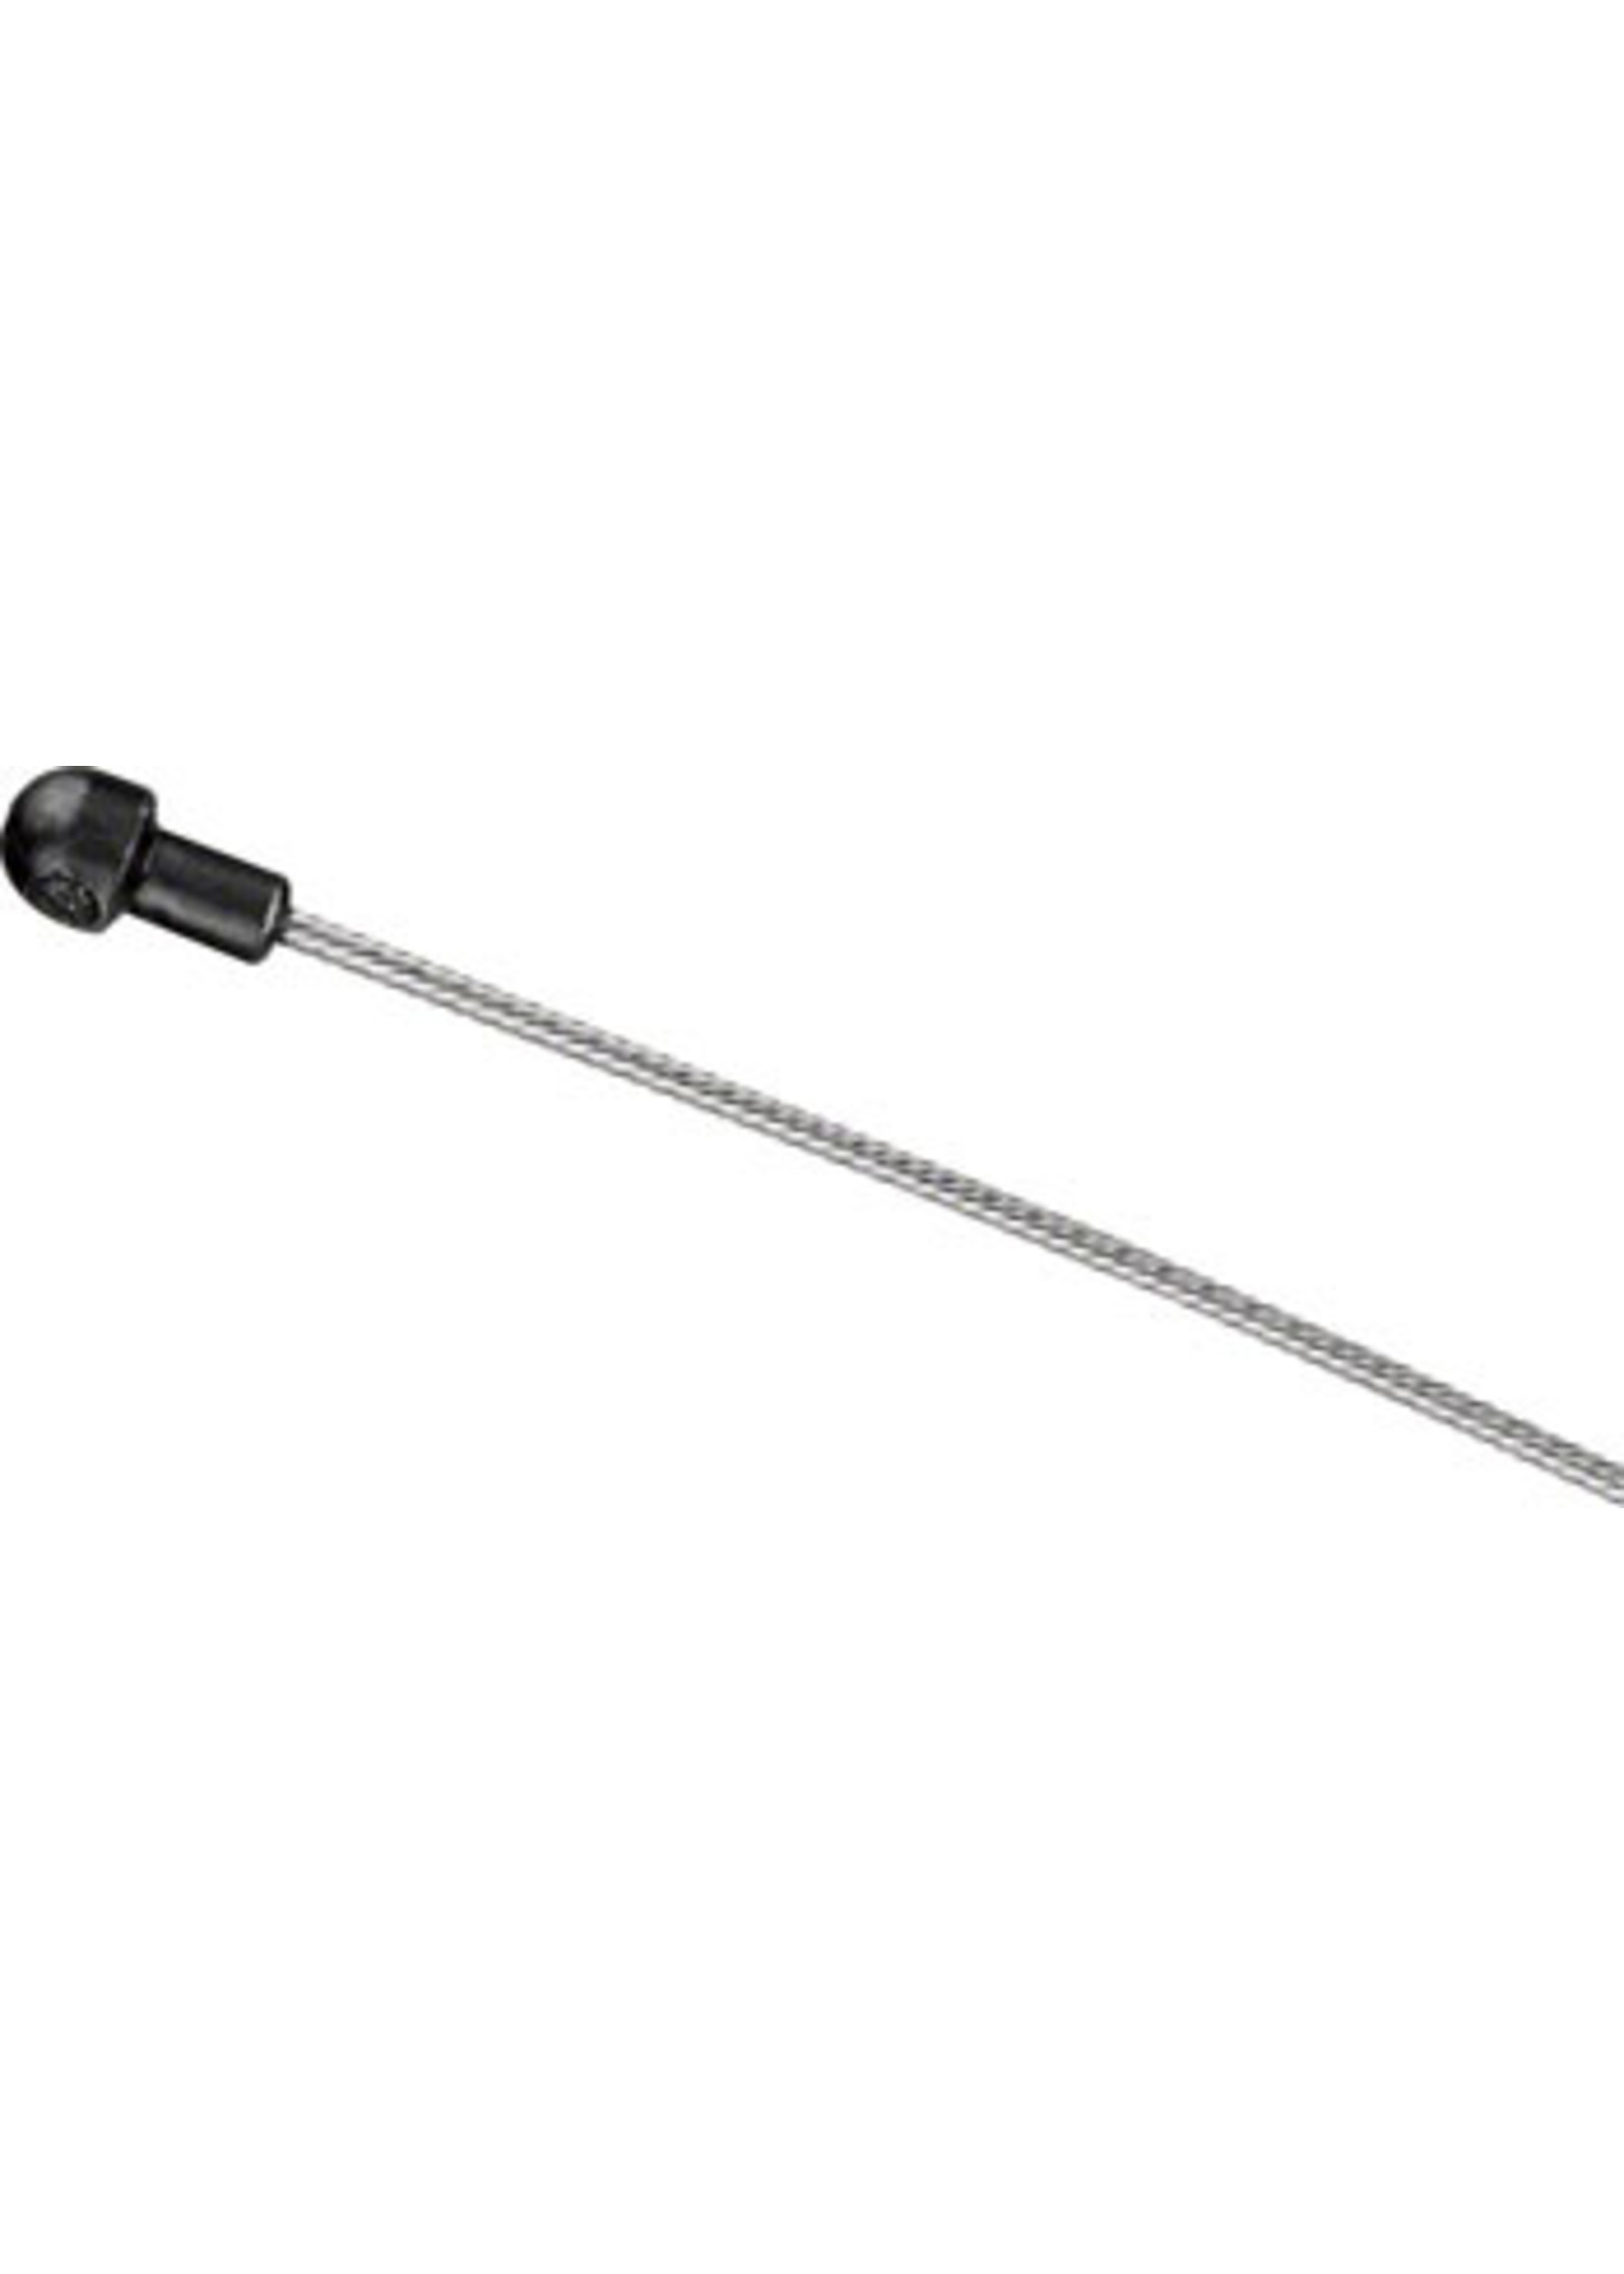 Jagwire Jagwire Elite Ultra-Slick Stainless Brake Cable 1.5x1700mm SRAM/Shimano Road